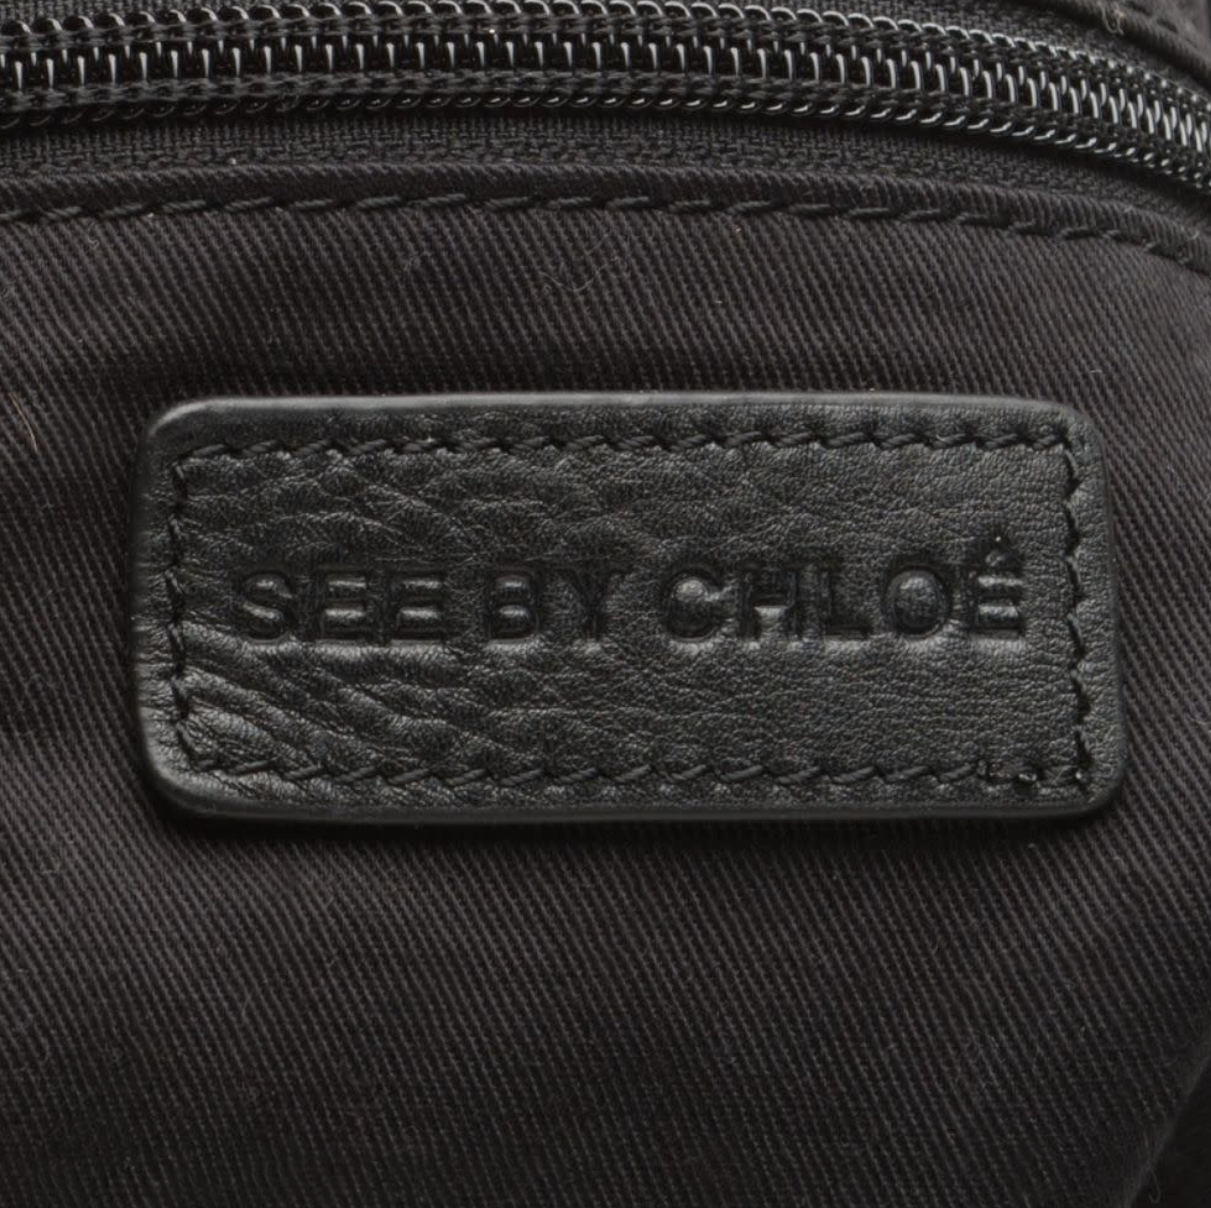 SEE BY CHOLÉ EMBOSSED SUEDE TOTE